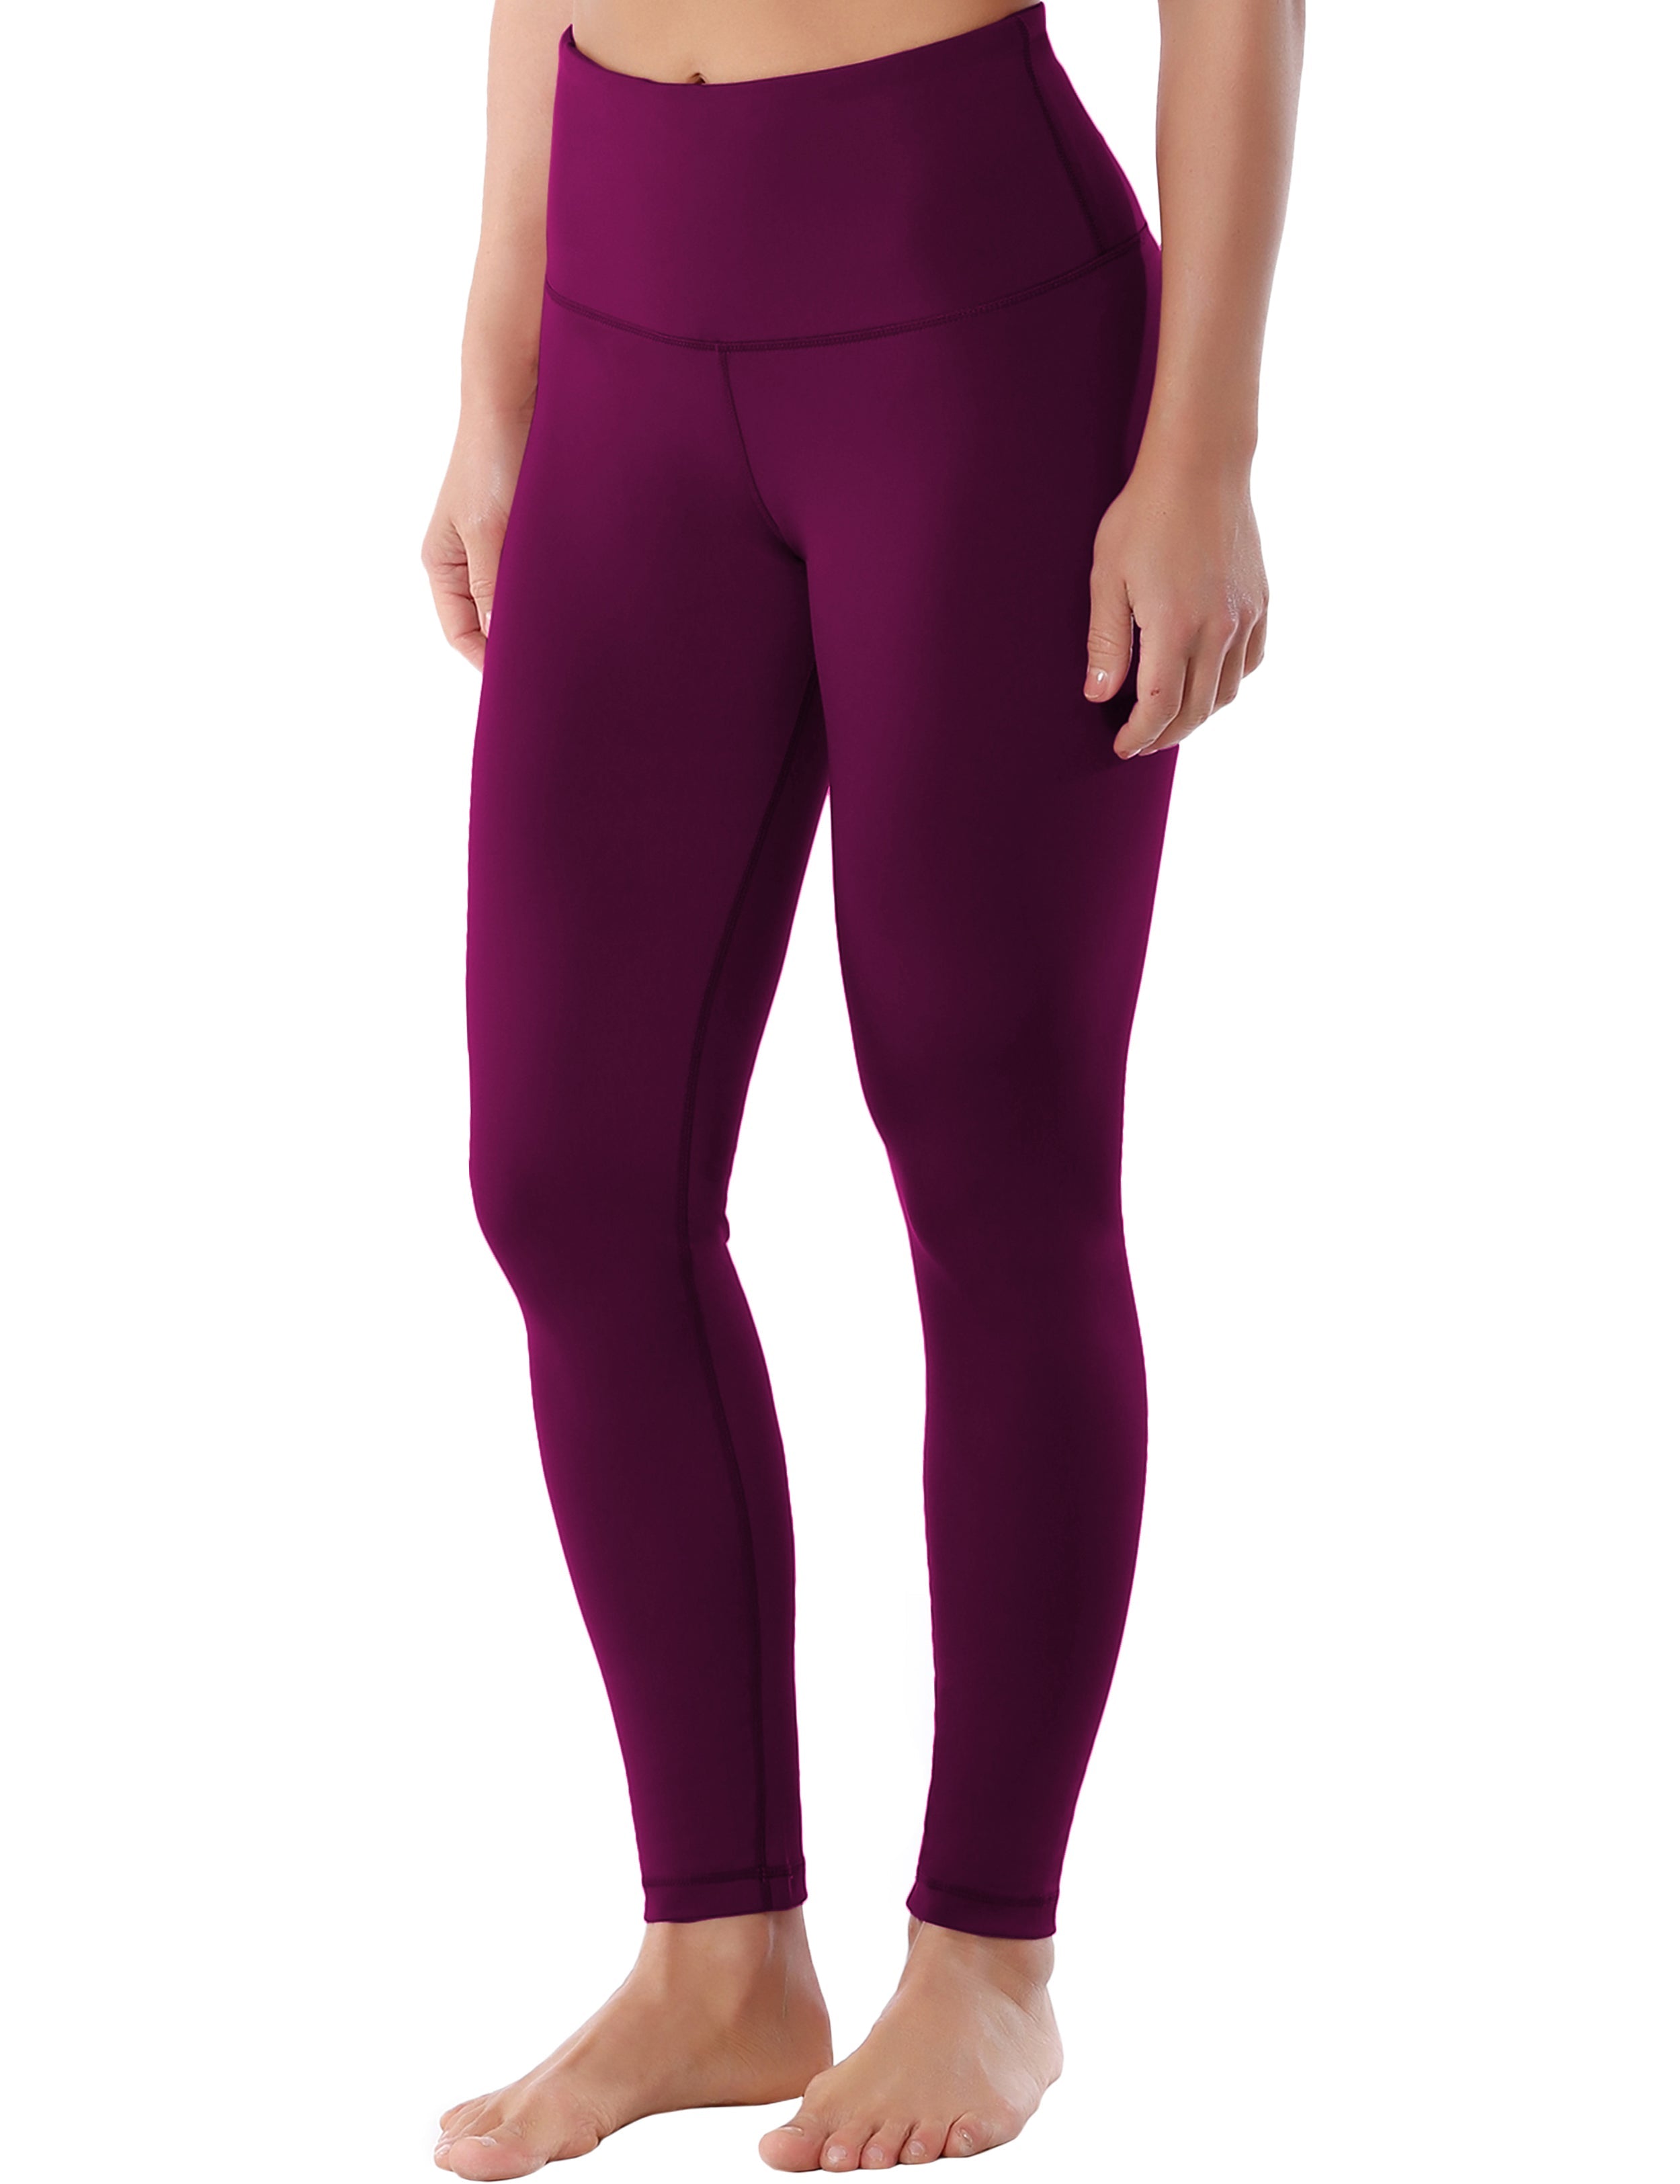 High Waist Gym Pants grapevine 75%Nylon/25%Spandex Fabric doesn't attract lint easily 4-way stretch No see-through Moisture-wicking Tummy control Inner pocket Four lengths